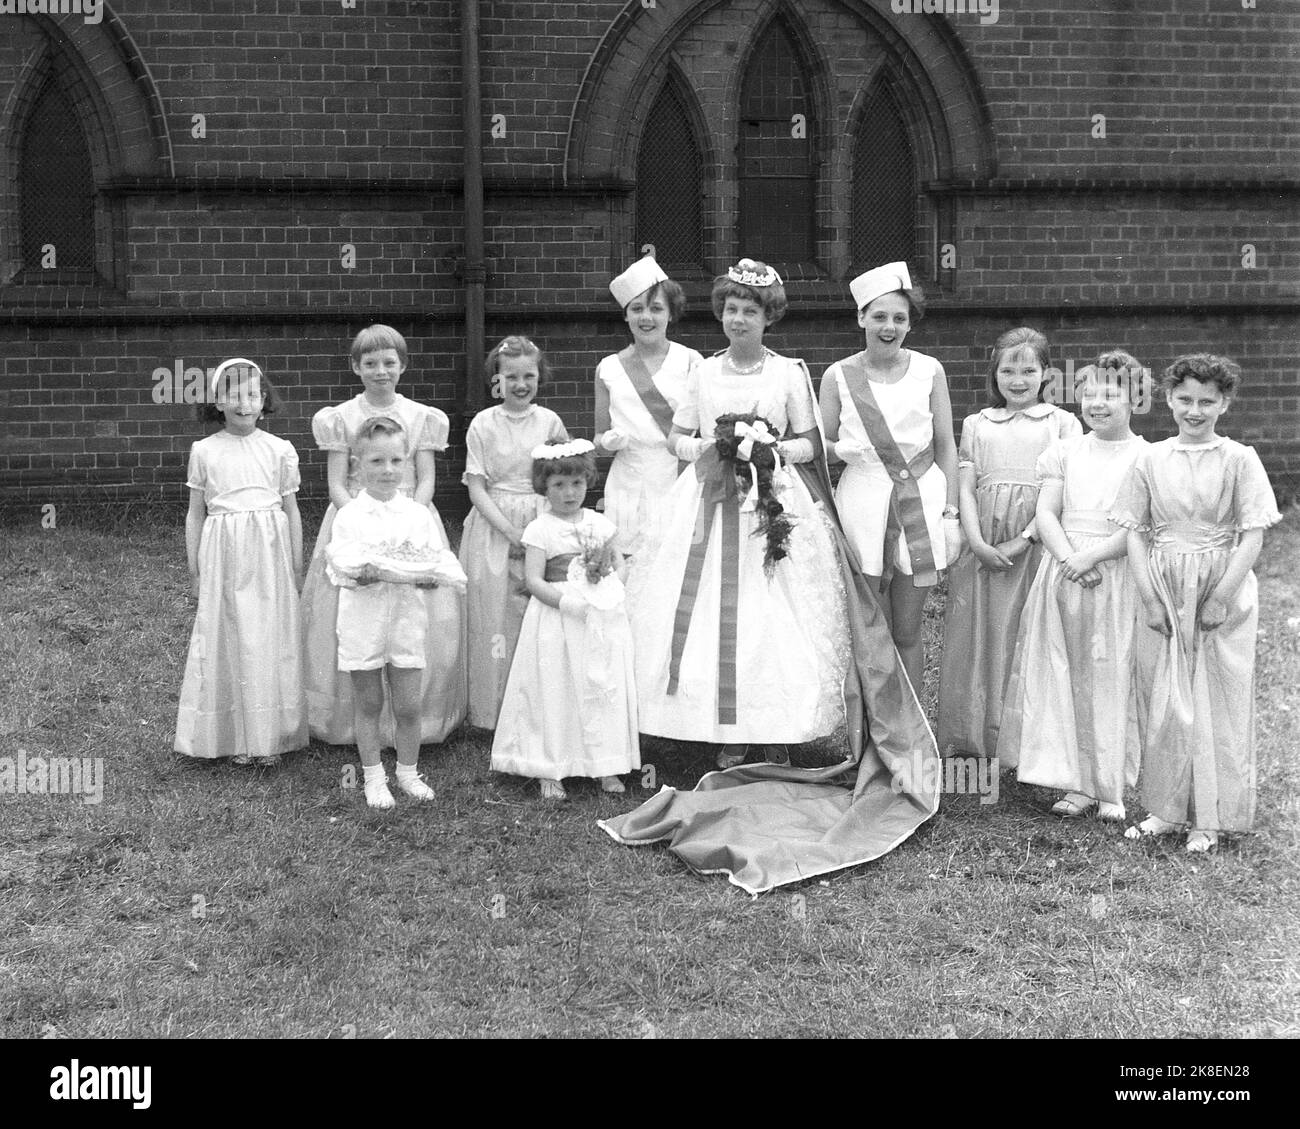 1962, historical, May Day, outside in the grounds of a church and this year's May Queen, standing with other children in their long dresses for the traditional festival that celebrates the summer, Leeds, England, UK. A little boy, the only male, holding the cushion for the crown. Stock Photo